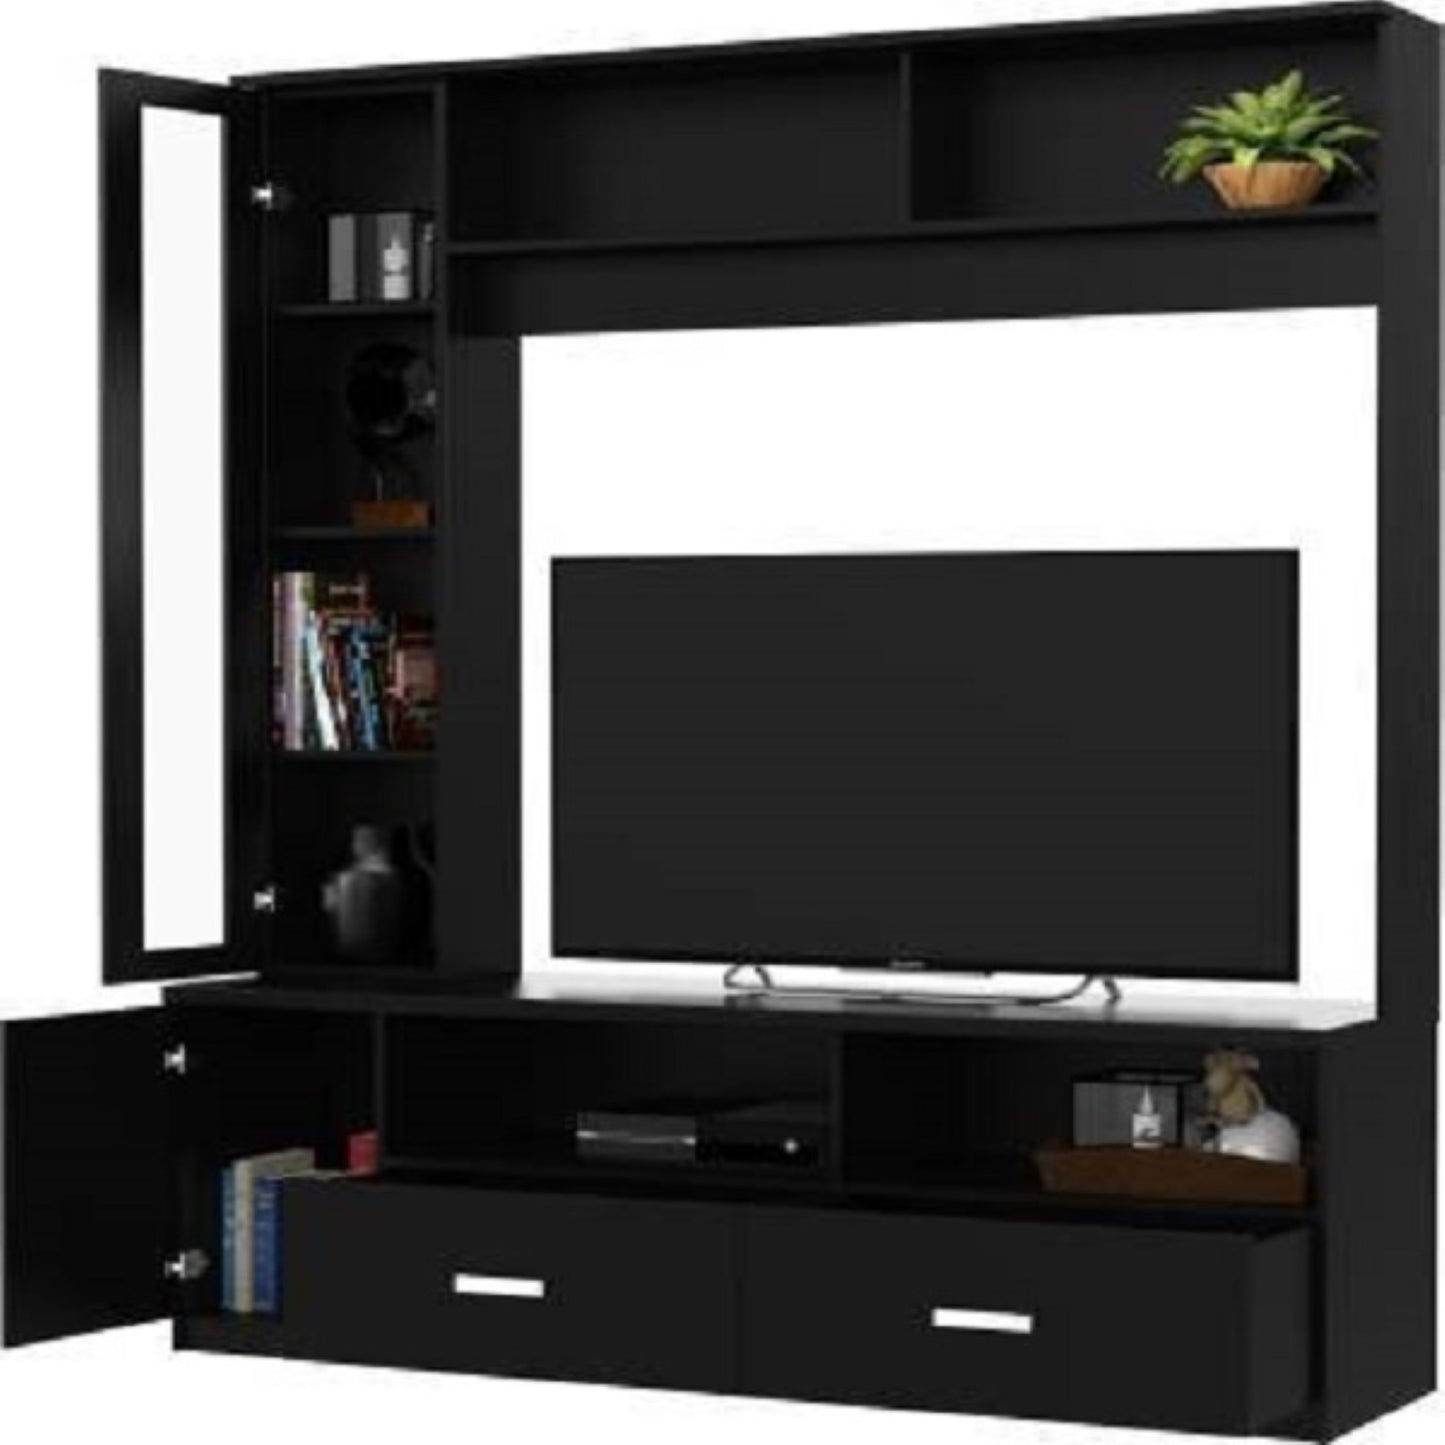 Bowzar Engineered Wood TV Cabinet TV Unit Showcase for 43 inch